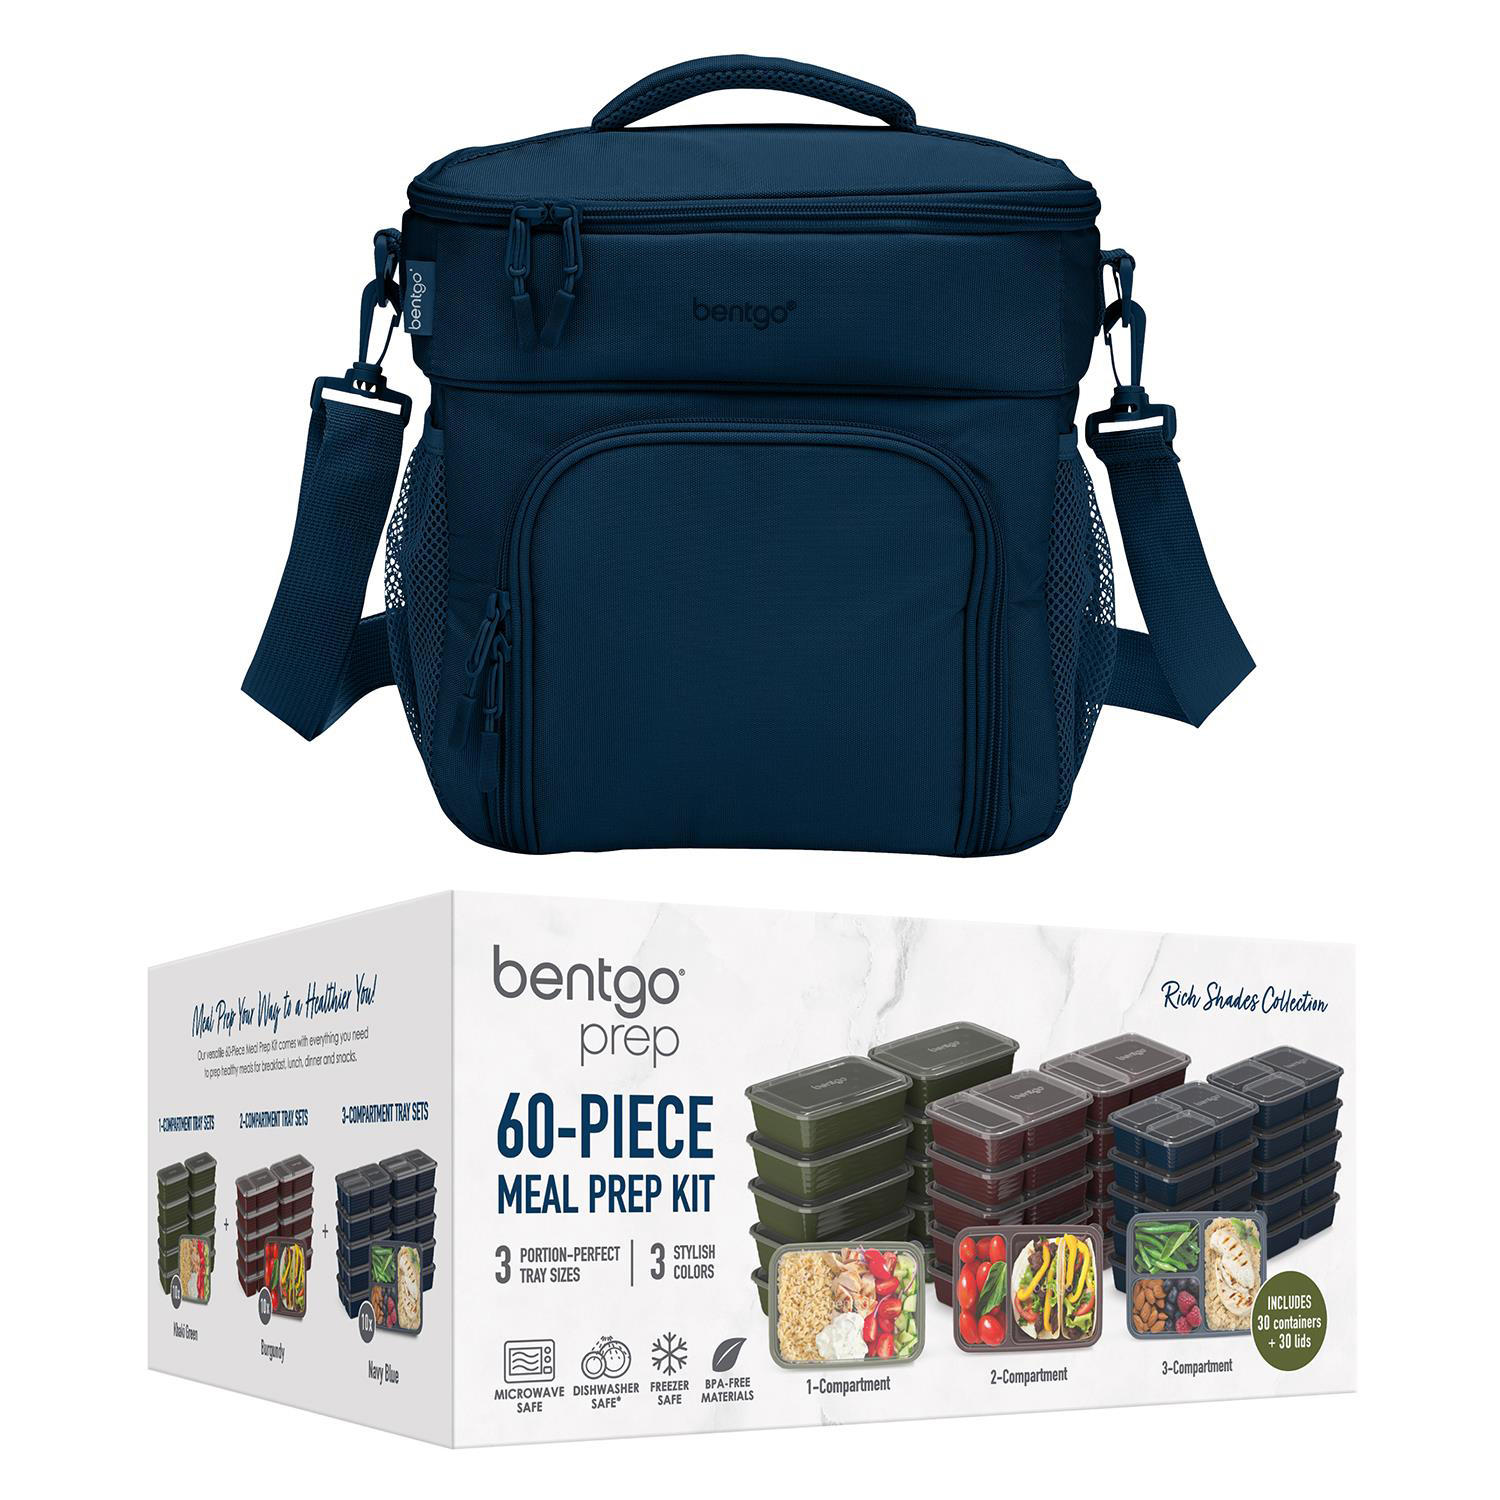 bentgo deluxe insulated lunch bag review｜TikTok Search